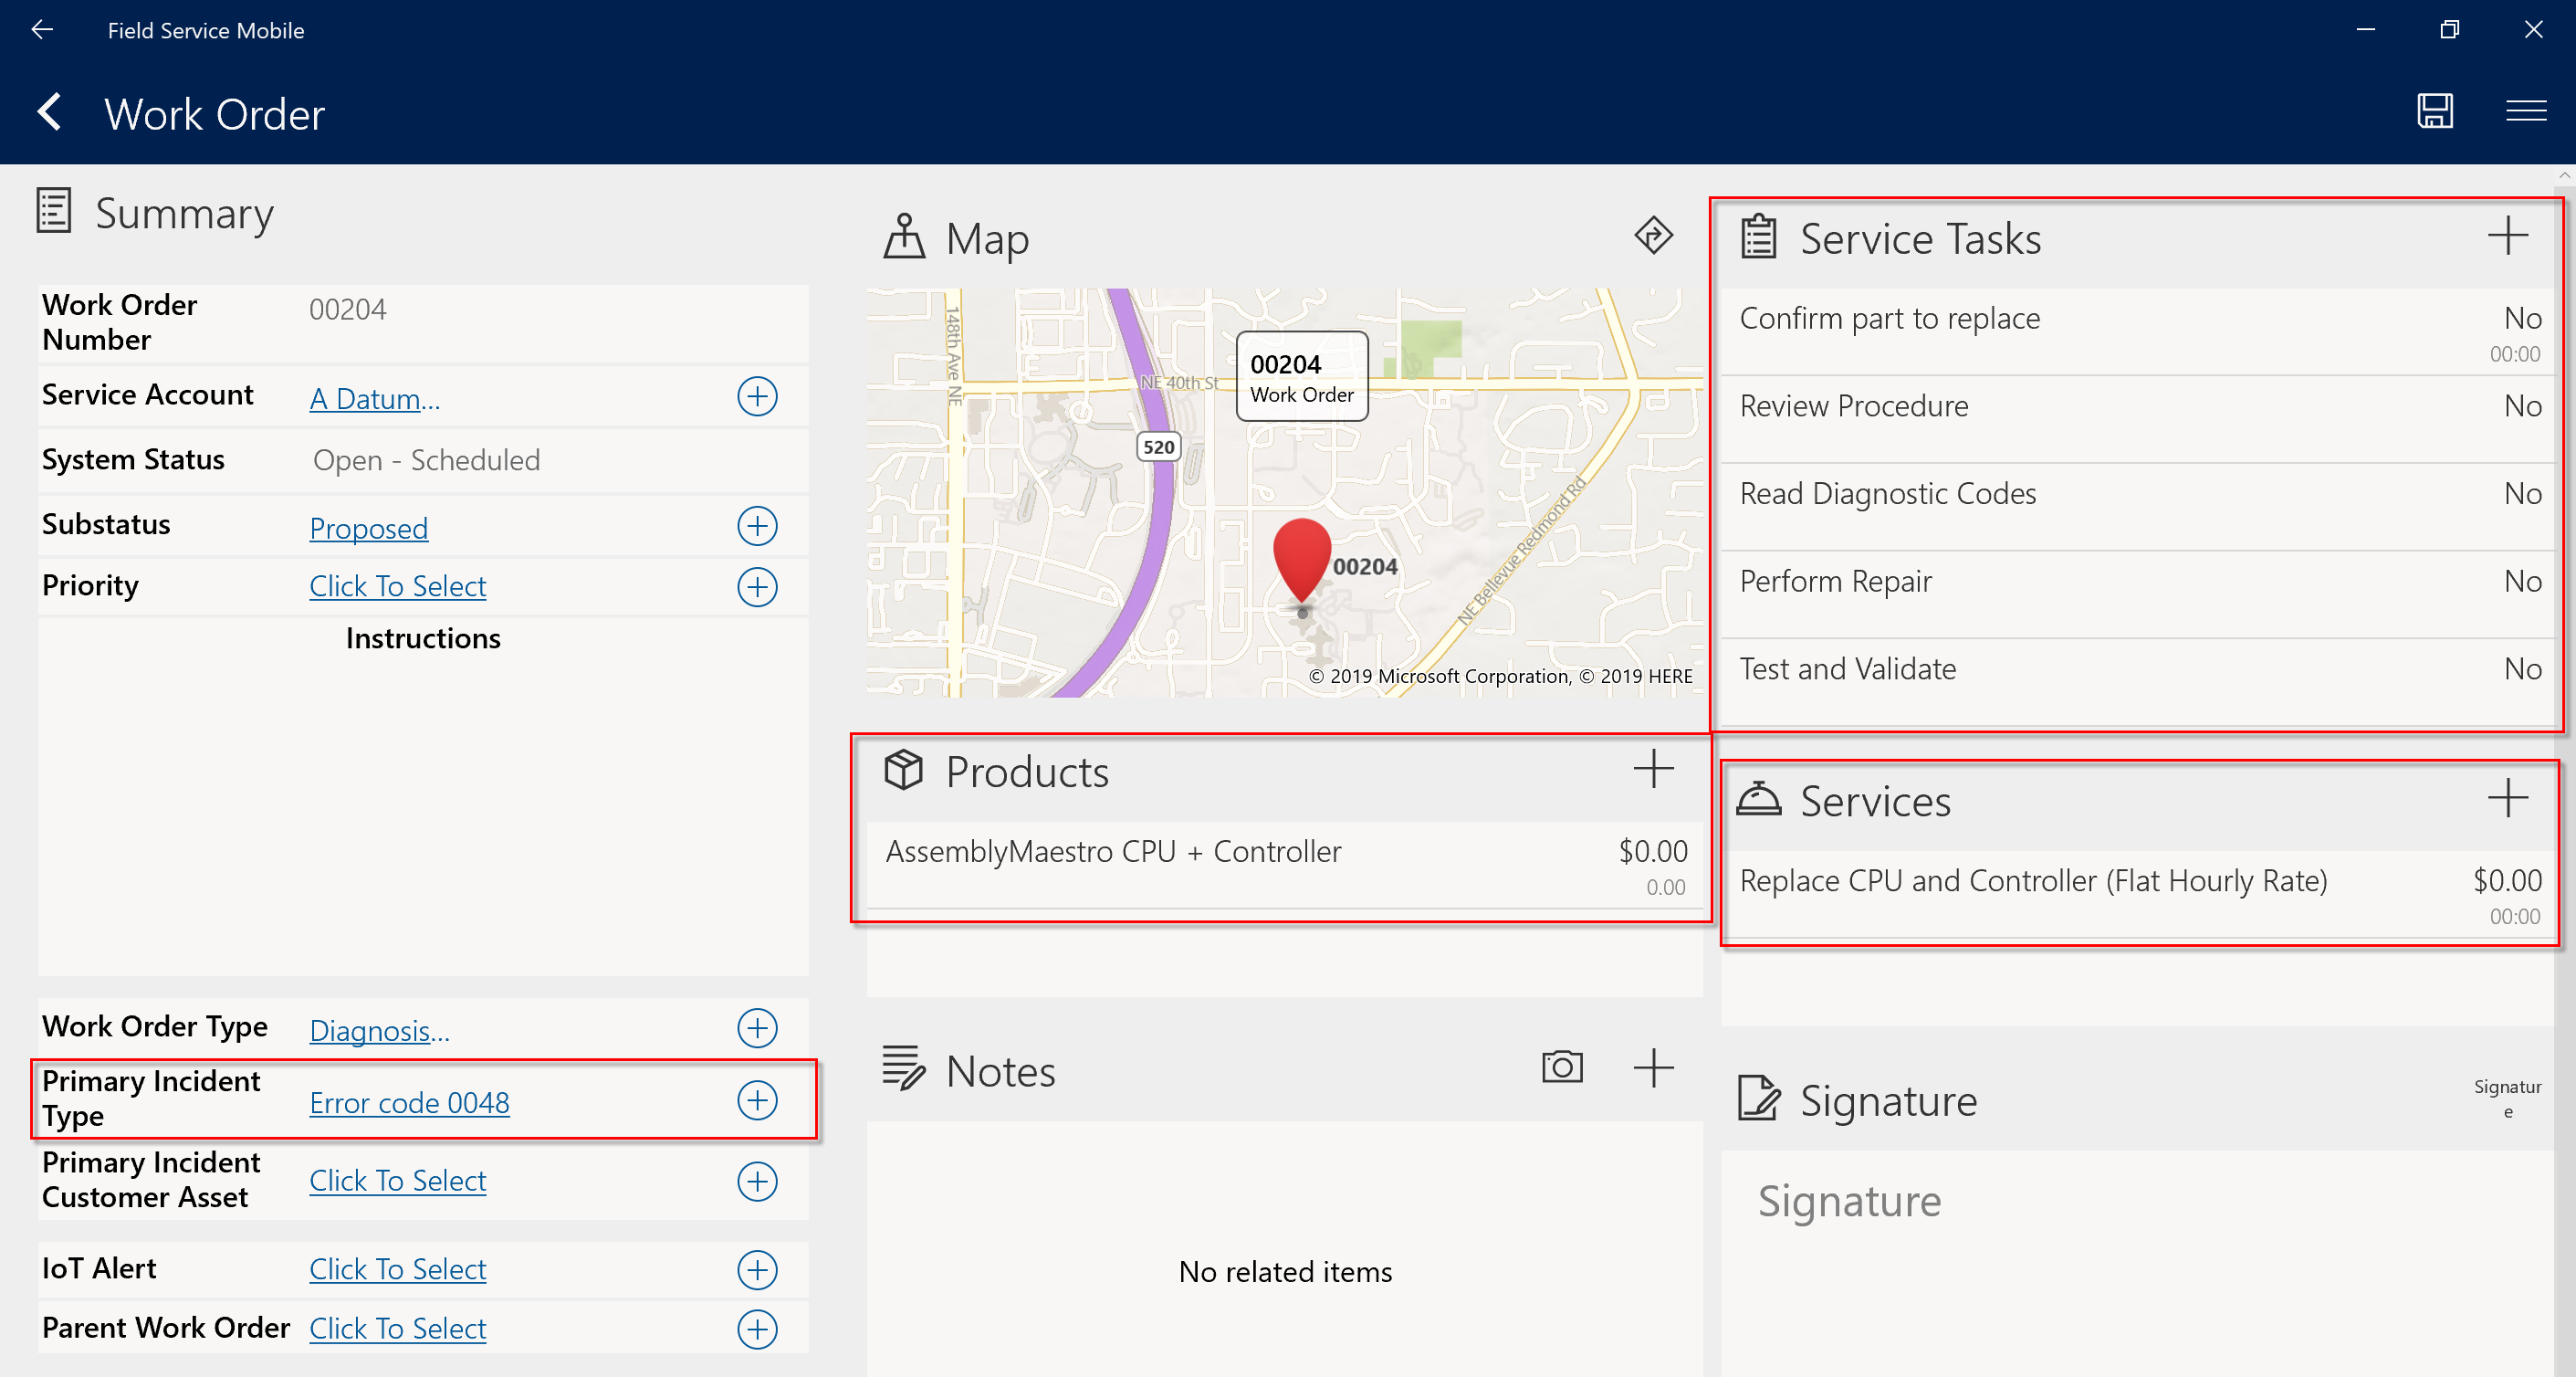 Screenshot of Field Service Mobile work order, with the populated information highlighted.